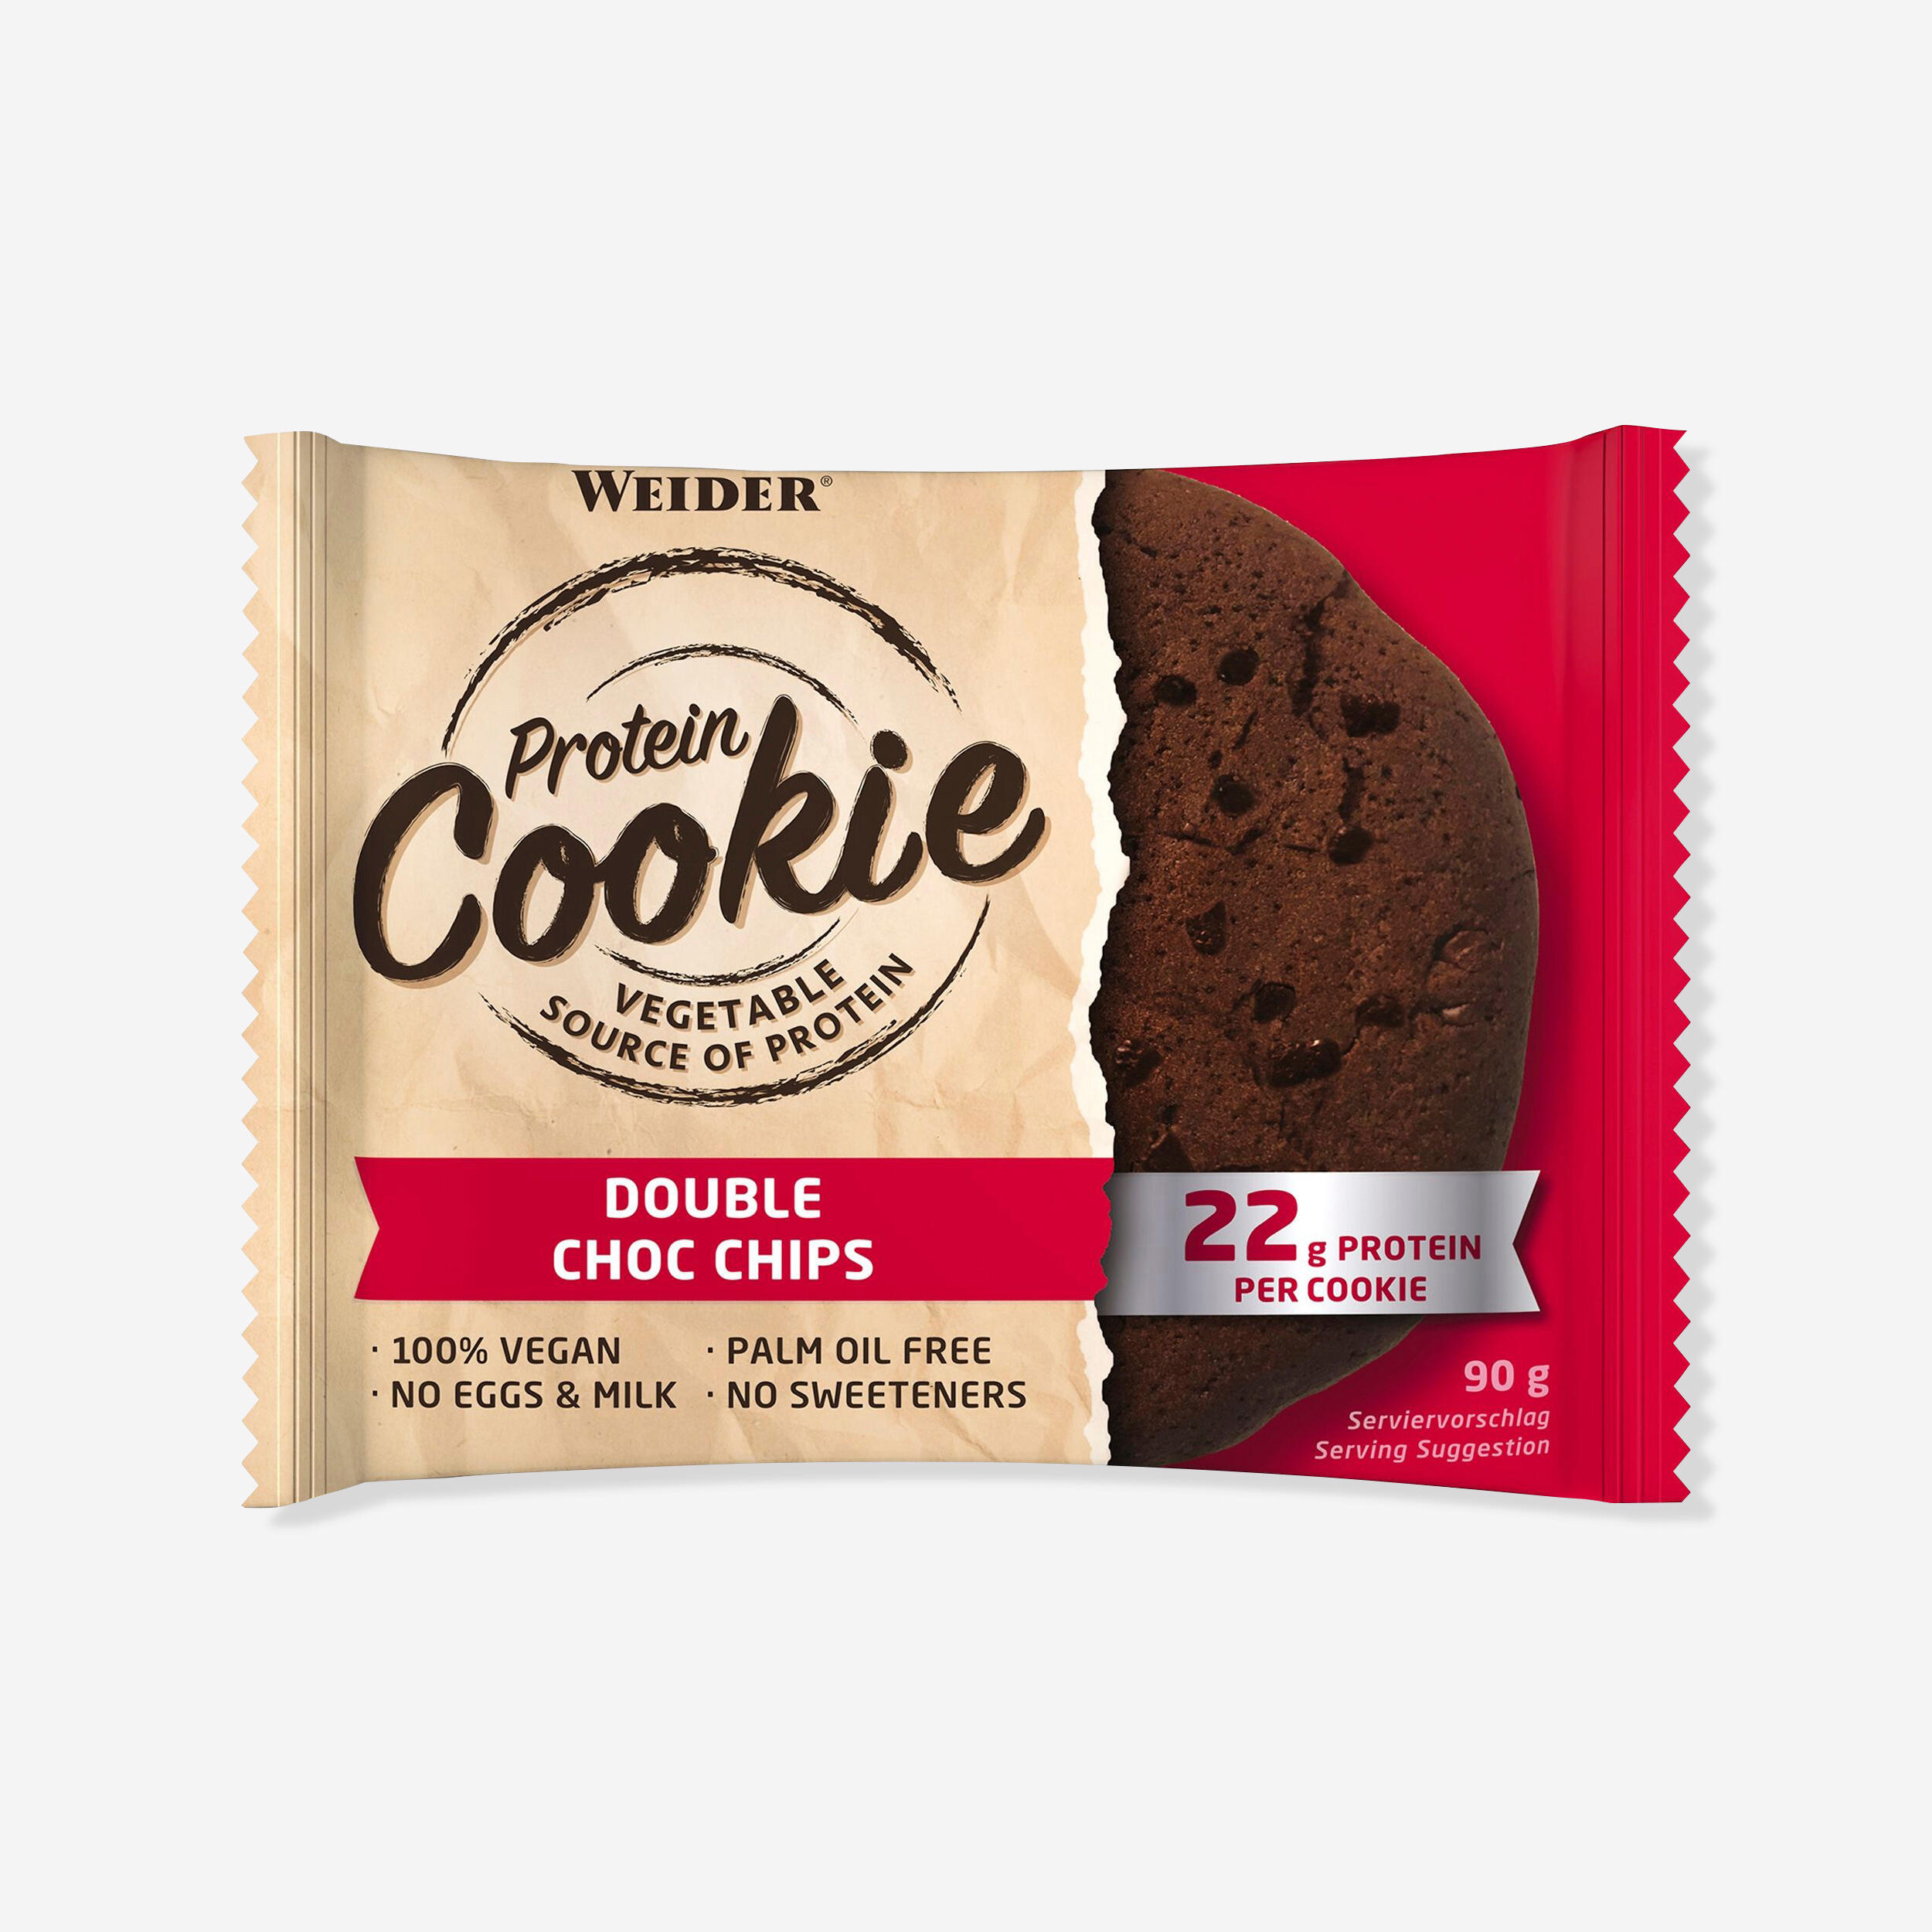 Biscuite proteic Cookie double choc chips 100% vegan 90 g decathlon.ro  Proteine si suplimente Alimentare